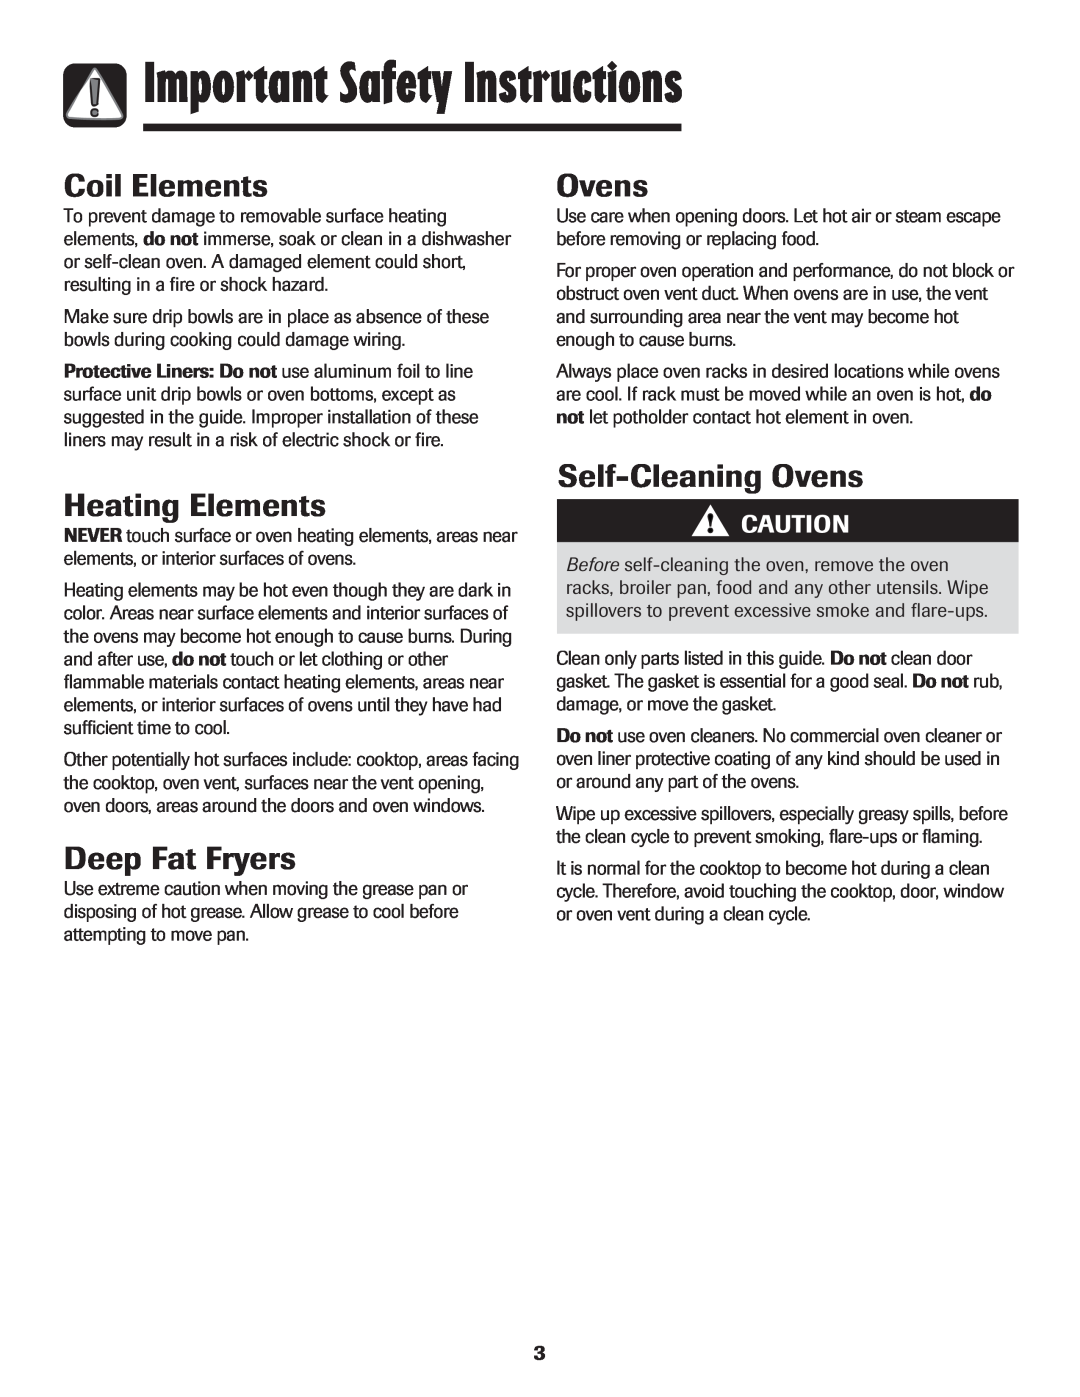 Maytag 500 Series Coil Elements, Heating Elements, Deep Fat Fryers, Self-Cleaning Ovens, Important Safety Instructions 